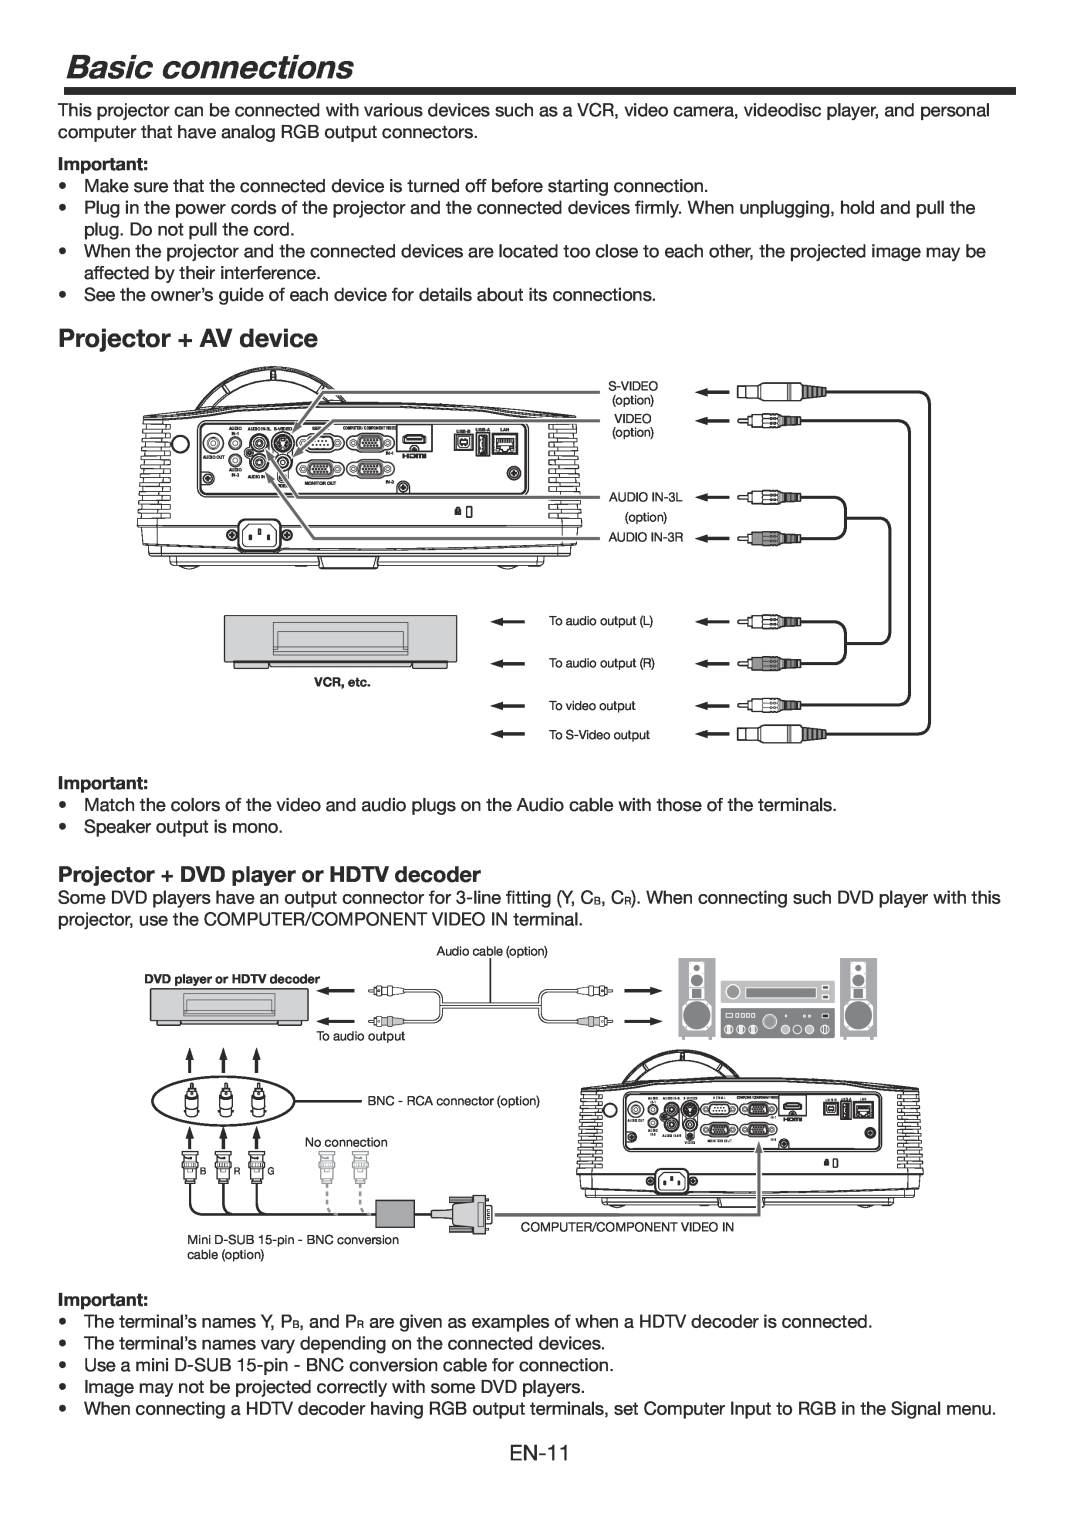 Mitsubishi Electronics WD390U-EST Basic connections, Projector + AV device, Projector + DVD player or HDTV decoder 